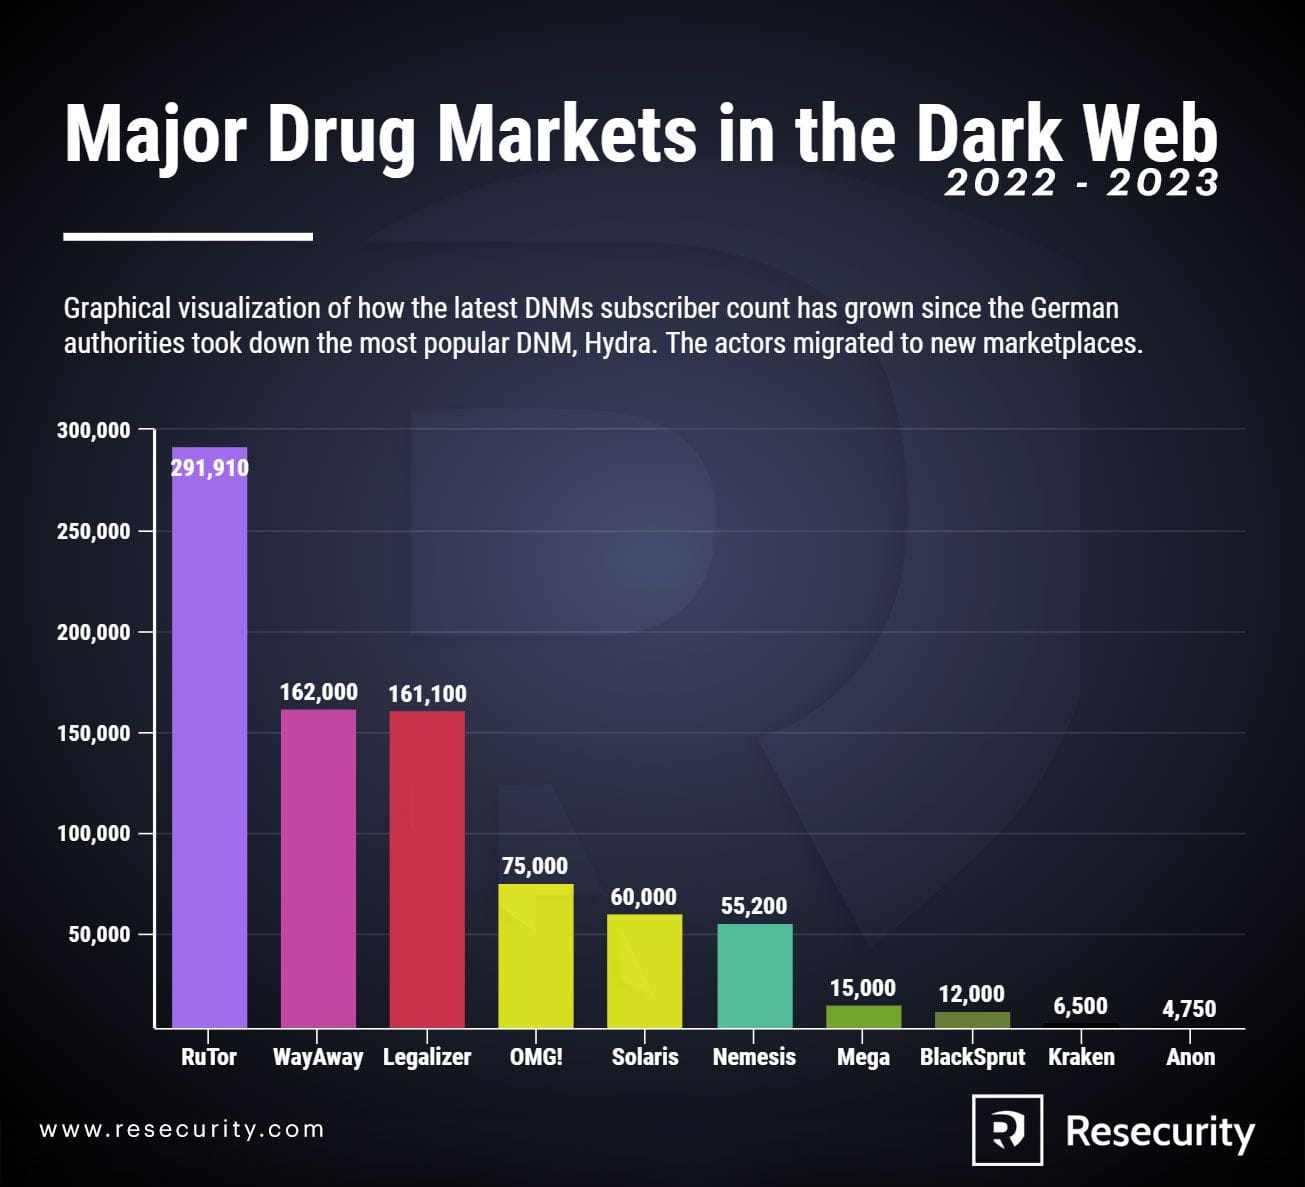 New users in each drug market